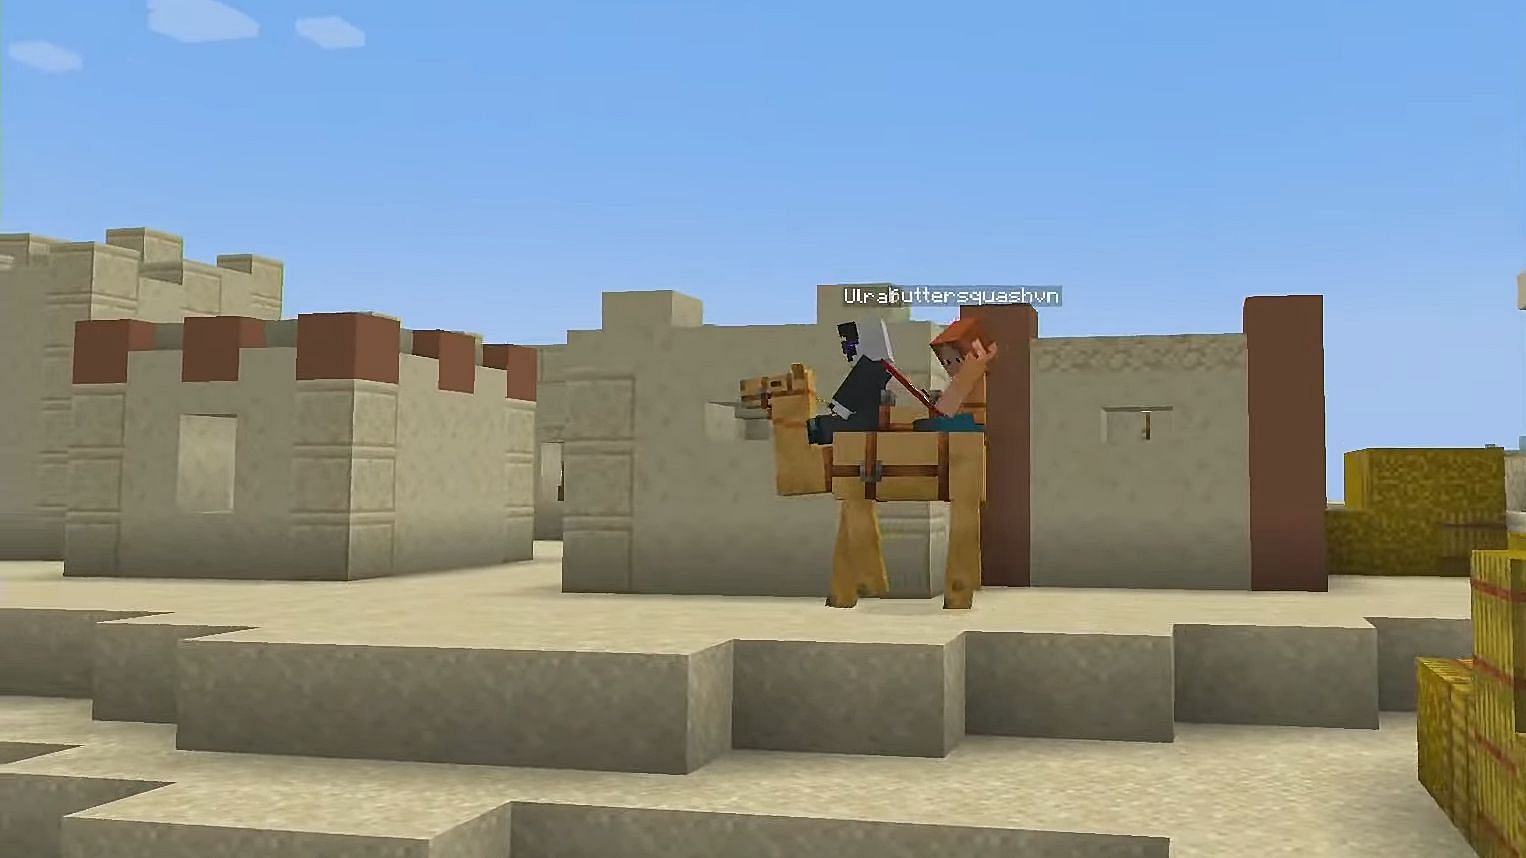 Two players can simultaneously ride camels in the Minecraft 1.20 Trails and Tales update (Image via YouTube/Minecraft)